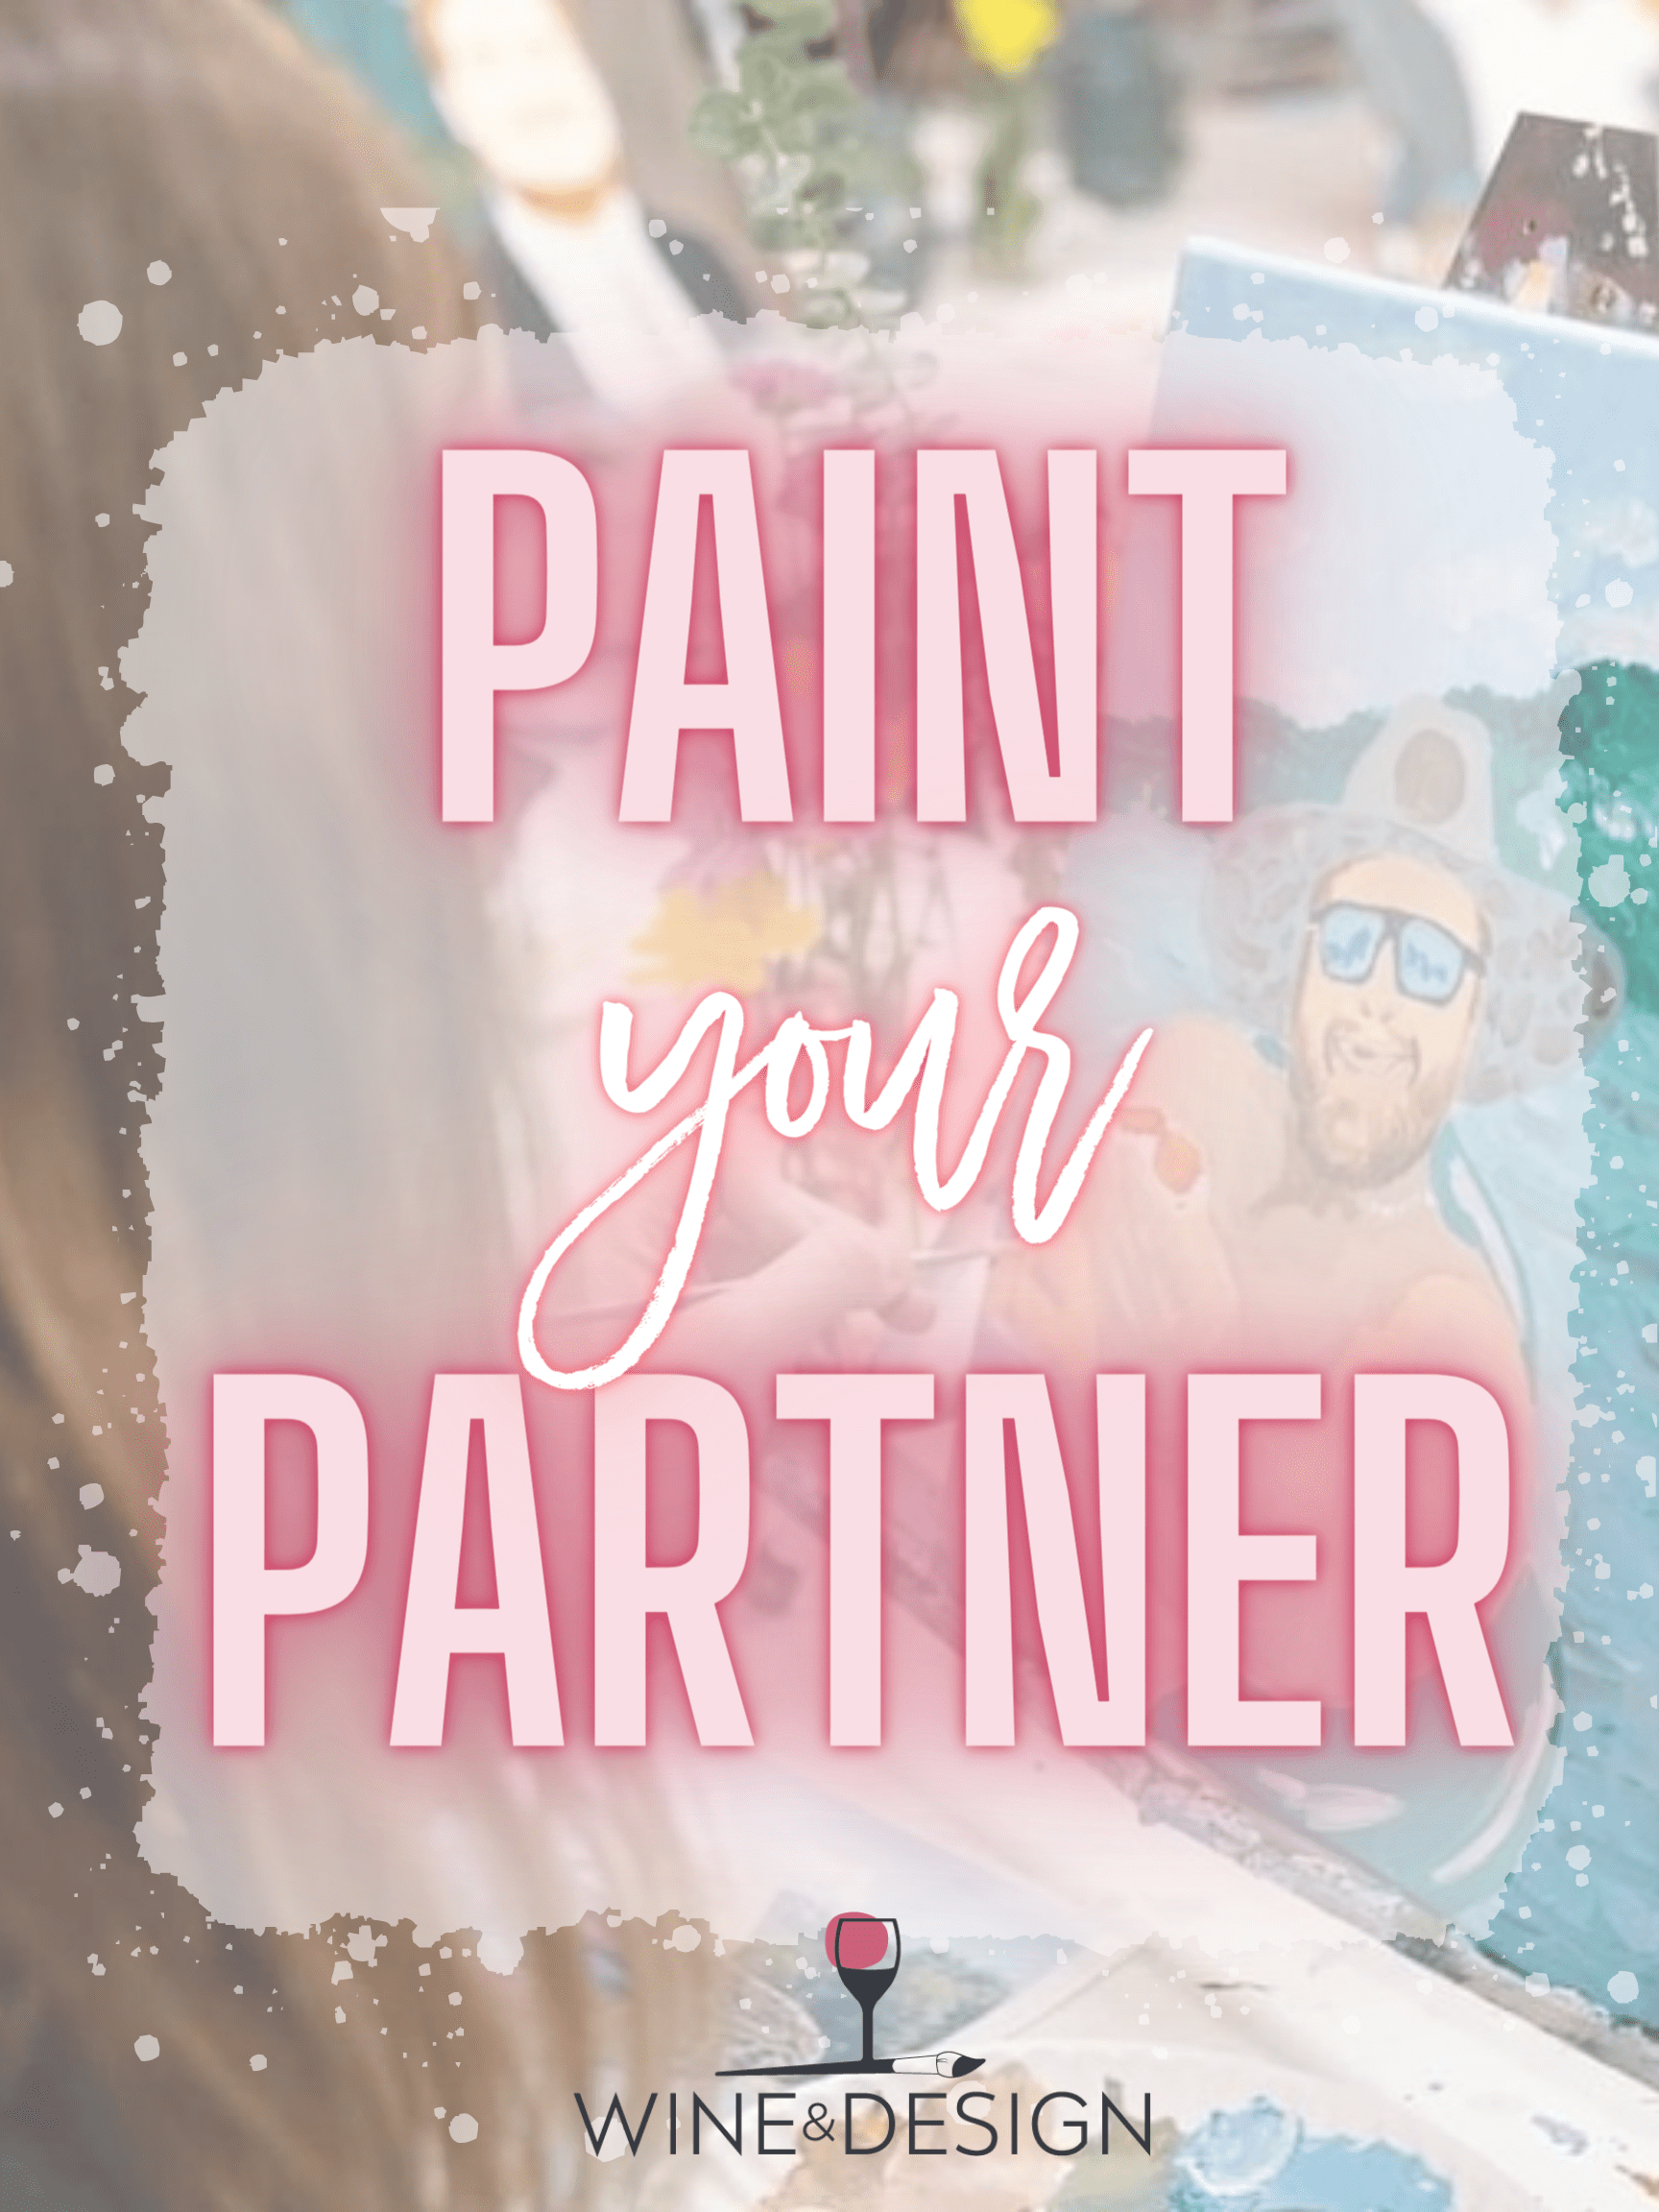 DATE NIGHT! Paint Your Partner!!